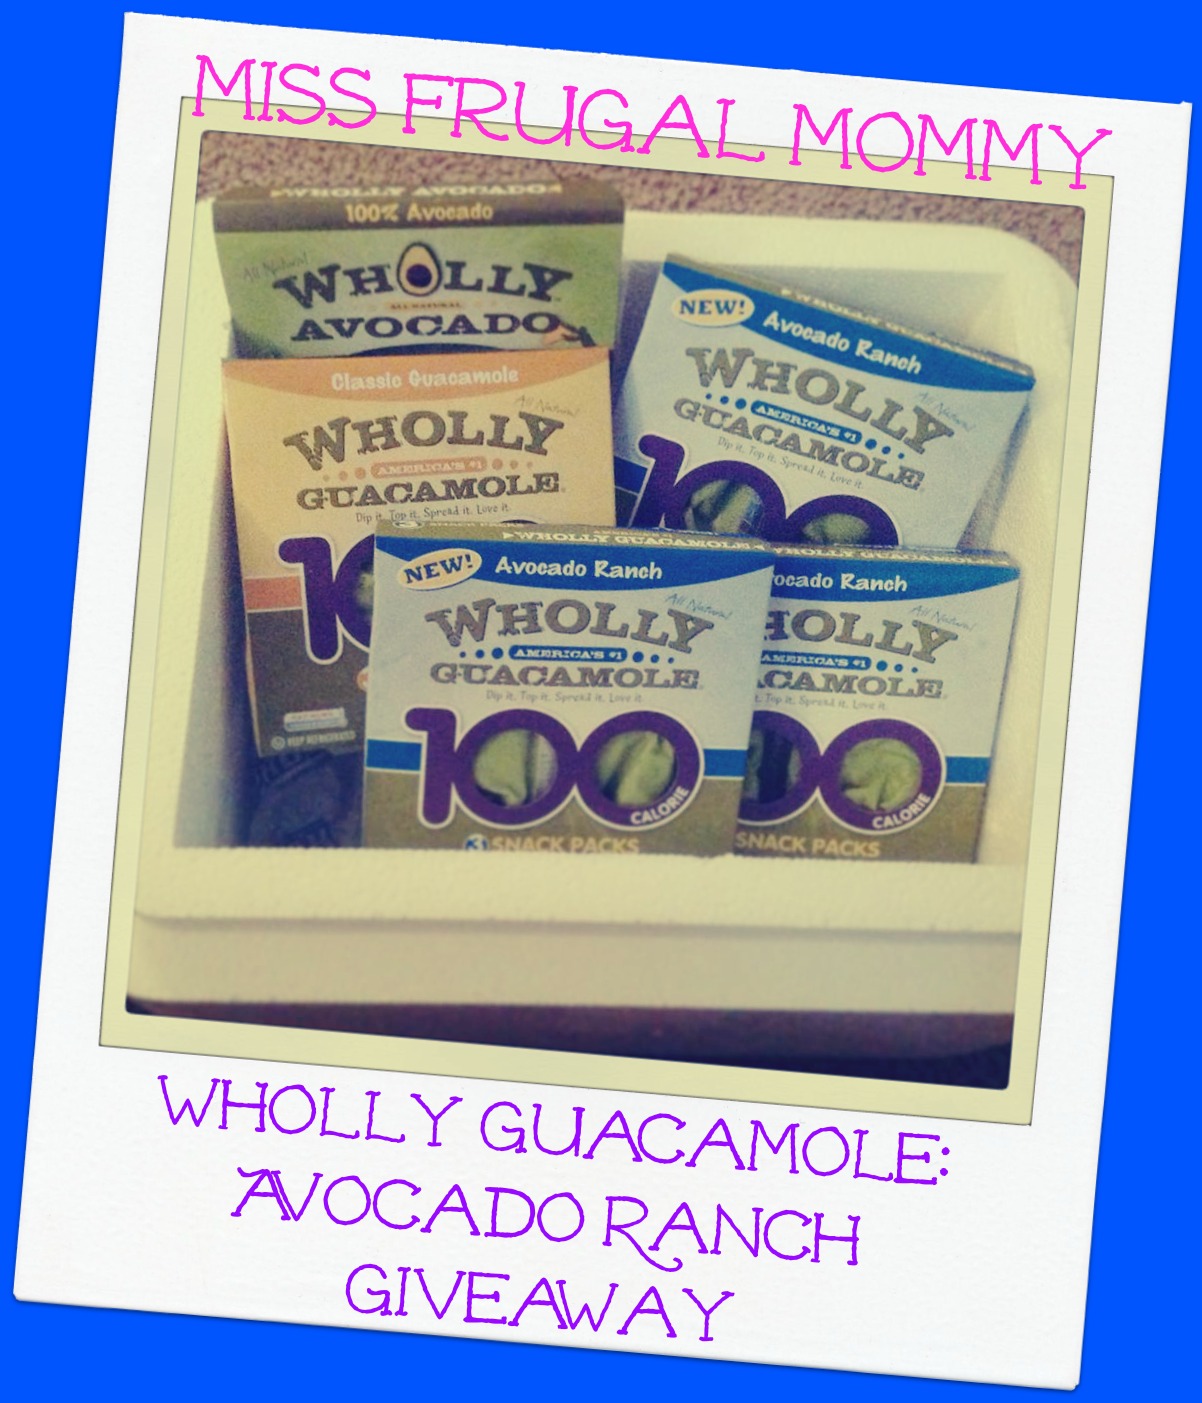 http://missfrugalmommy.com/wp-content/uploads/2013/07/wholly-giveaway-button.jpg